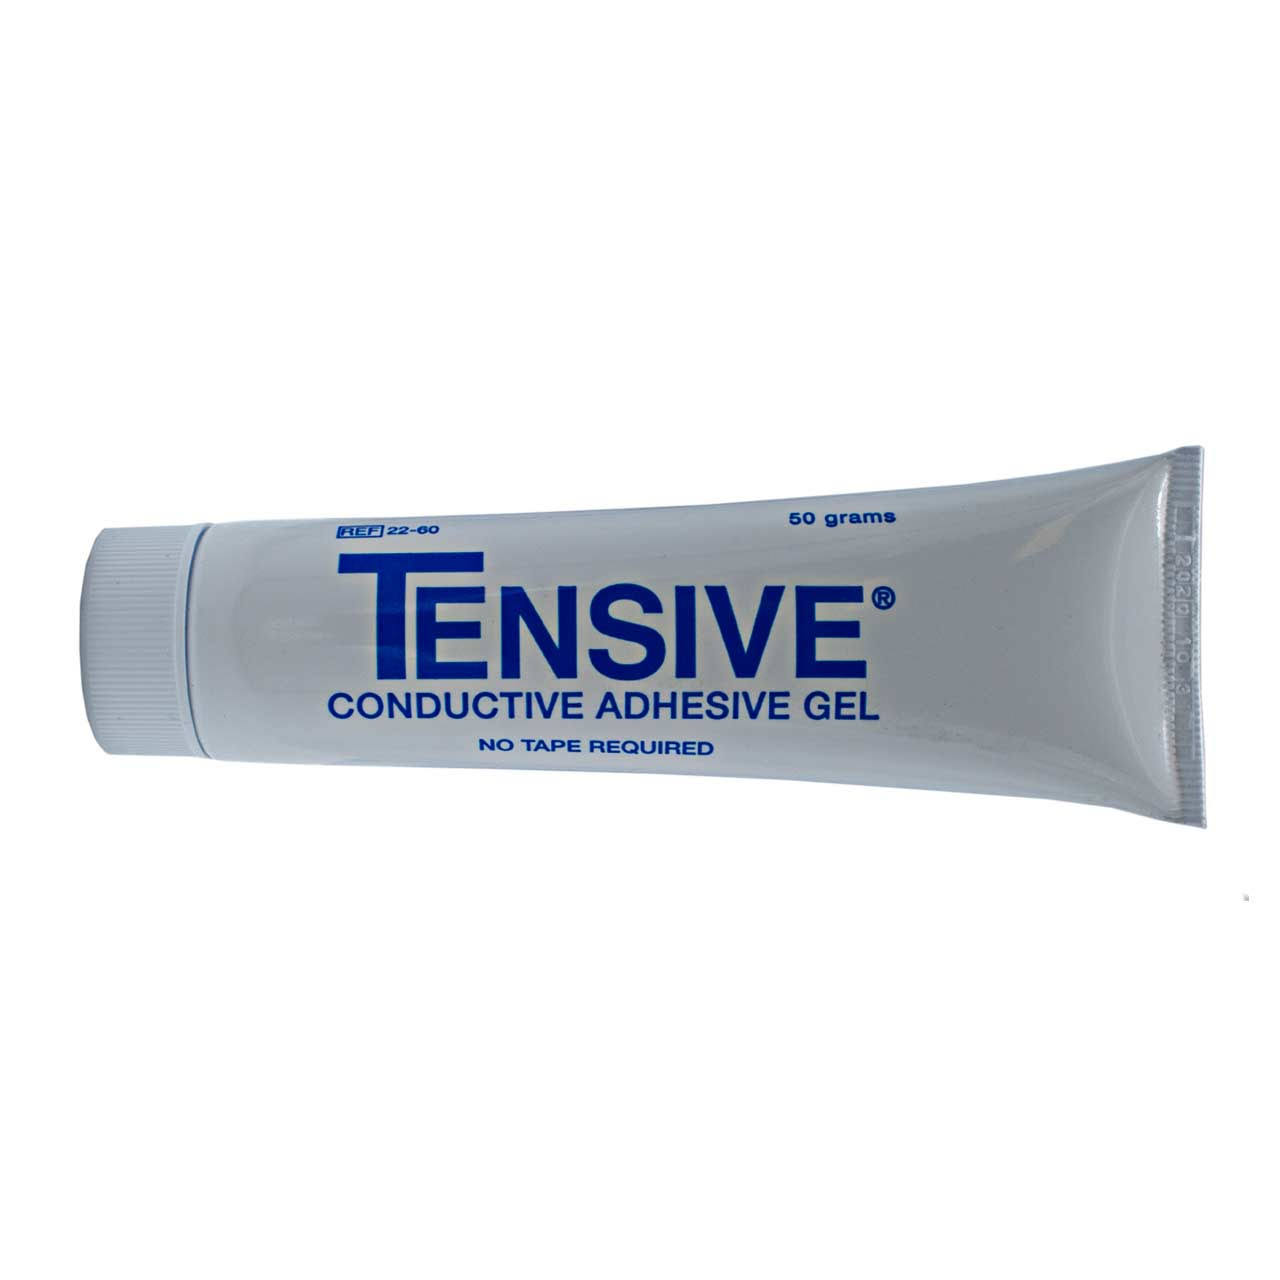 Parker Labs Tensive Conductive Adhesive Gel - 50g